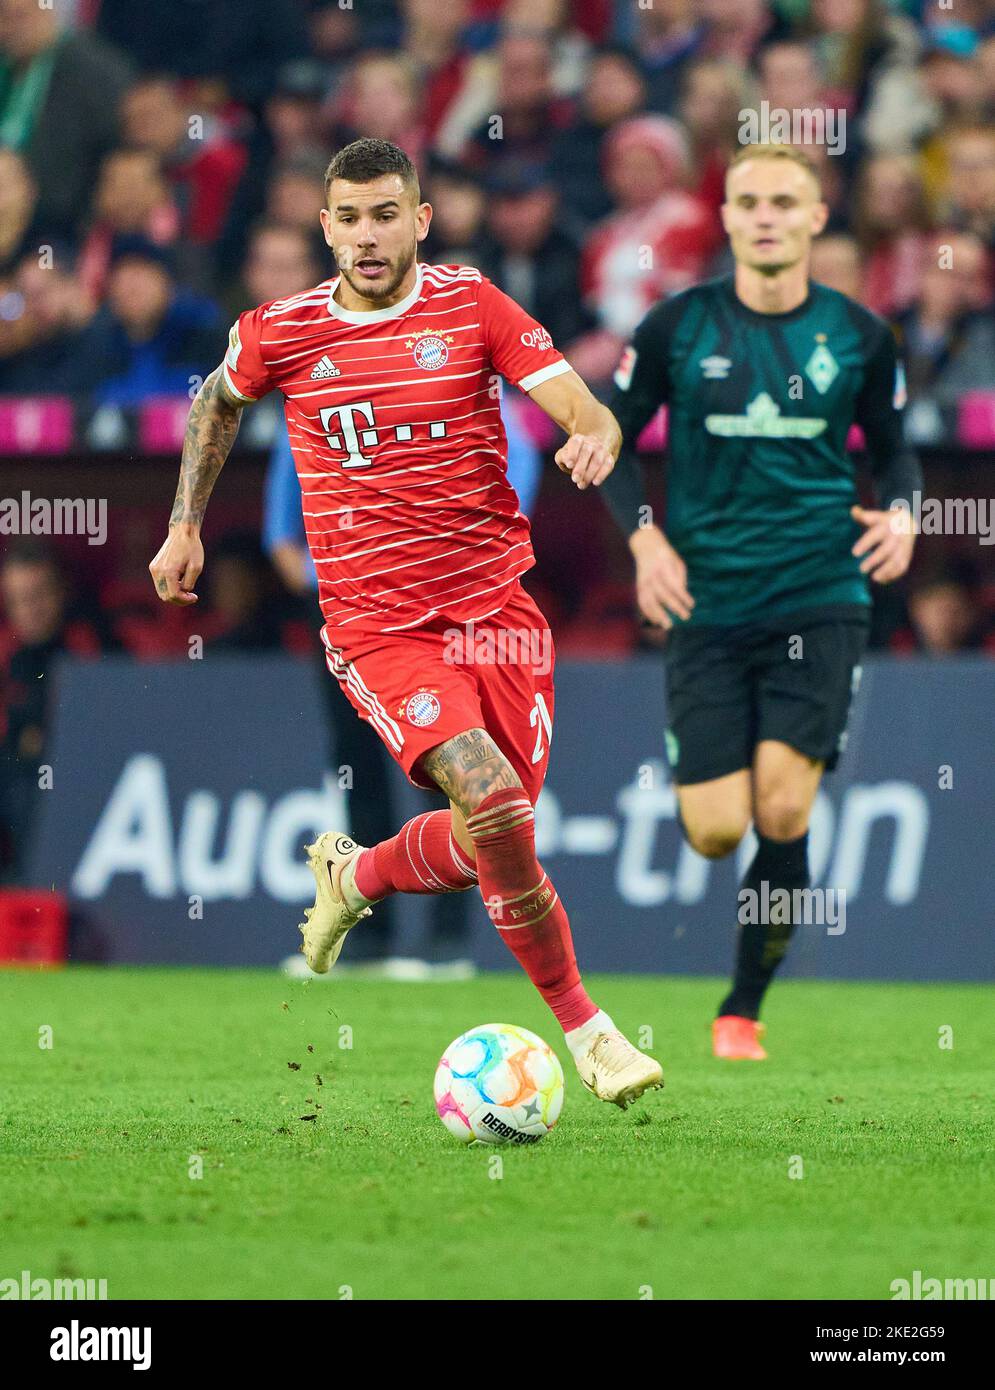 Lucas HERNANDEZ (FCB 21)  in the match FC BAYERN MÜNCHEN - SV WERDER BREMEN 6-1 1.German Football League on Nov 8, 2022 in Munich, Germany. Season 2022/2023, matchday 14, 1.Bundesliga, FCB, München, 14.Spieltag © Peter Schatz / Alamy Live News    - DFL REGULATIONS PROHIBIT ANY USE OF PHOTOGRAPHS as IMAGE SEQUENCES and/or QUASI-VIDEO - Stock Photo